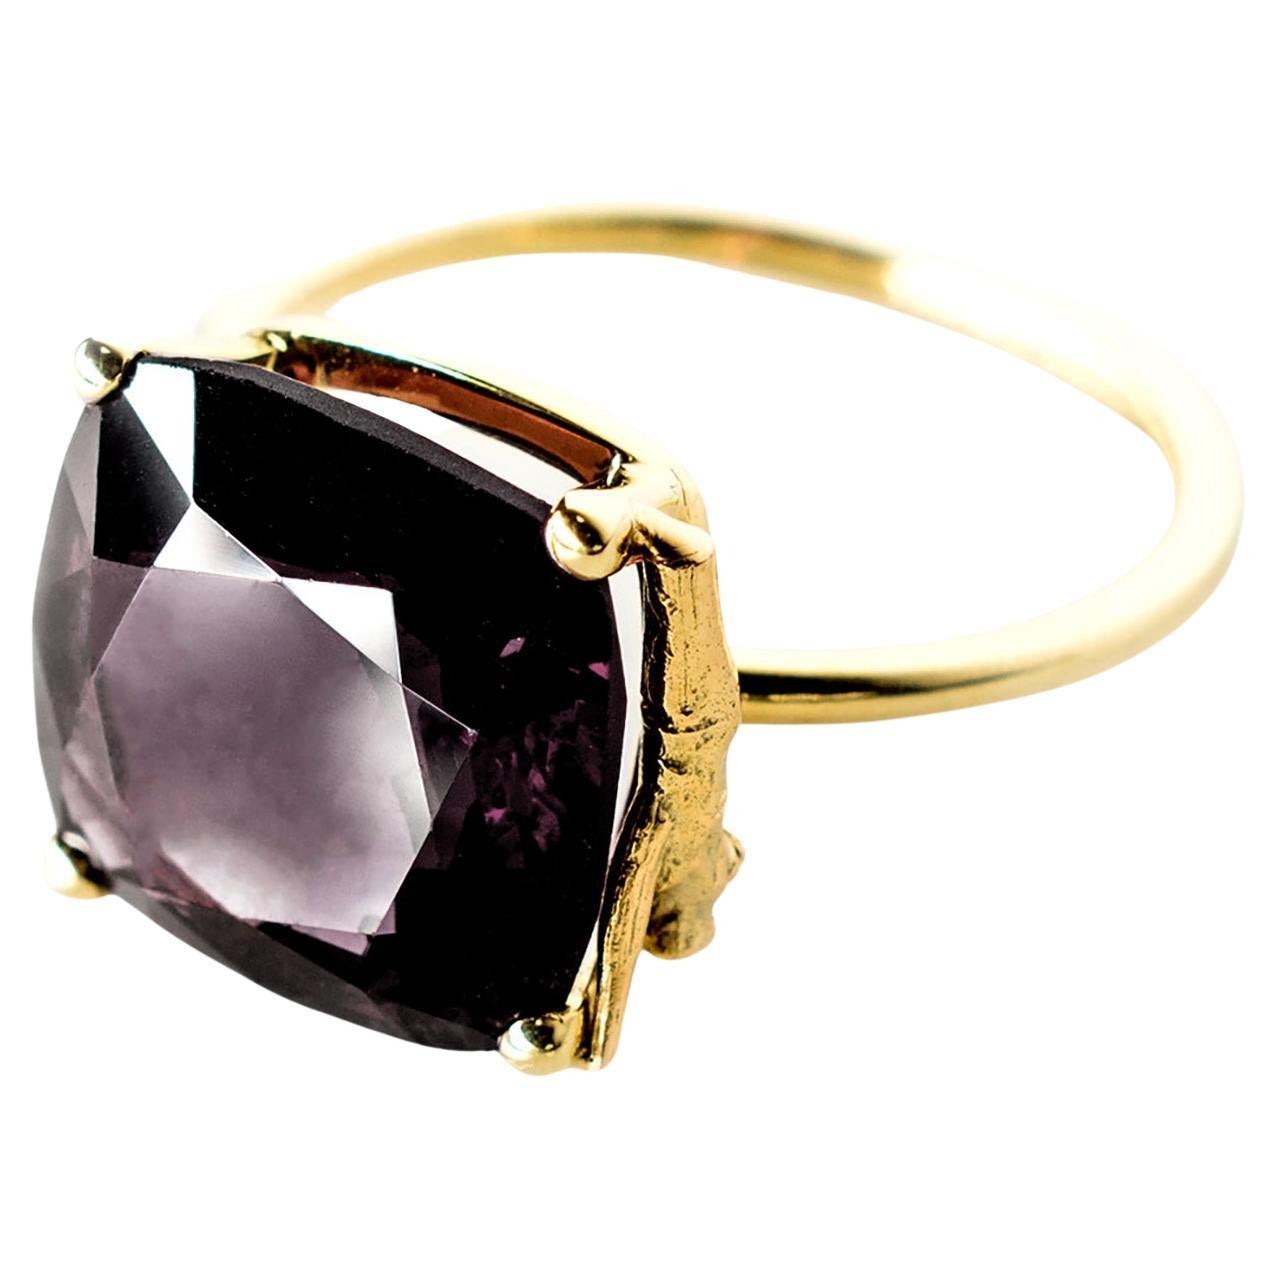 This ring is made of 14-karat rose gold and features a cushion storm color spinel. The size of the ring can be customized to fit you perfectly.

Additionally, the ring can be ordered in 18-karat yellow, rose, or white gold with spinels in other